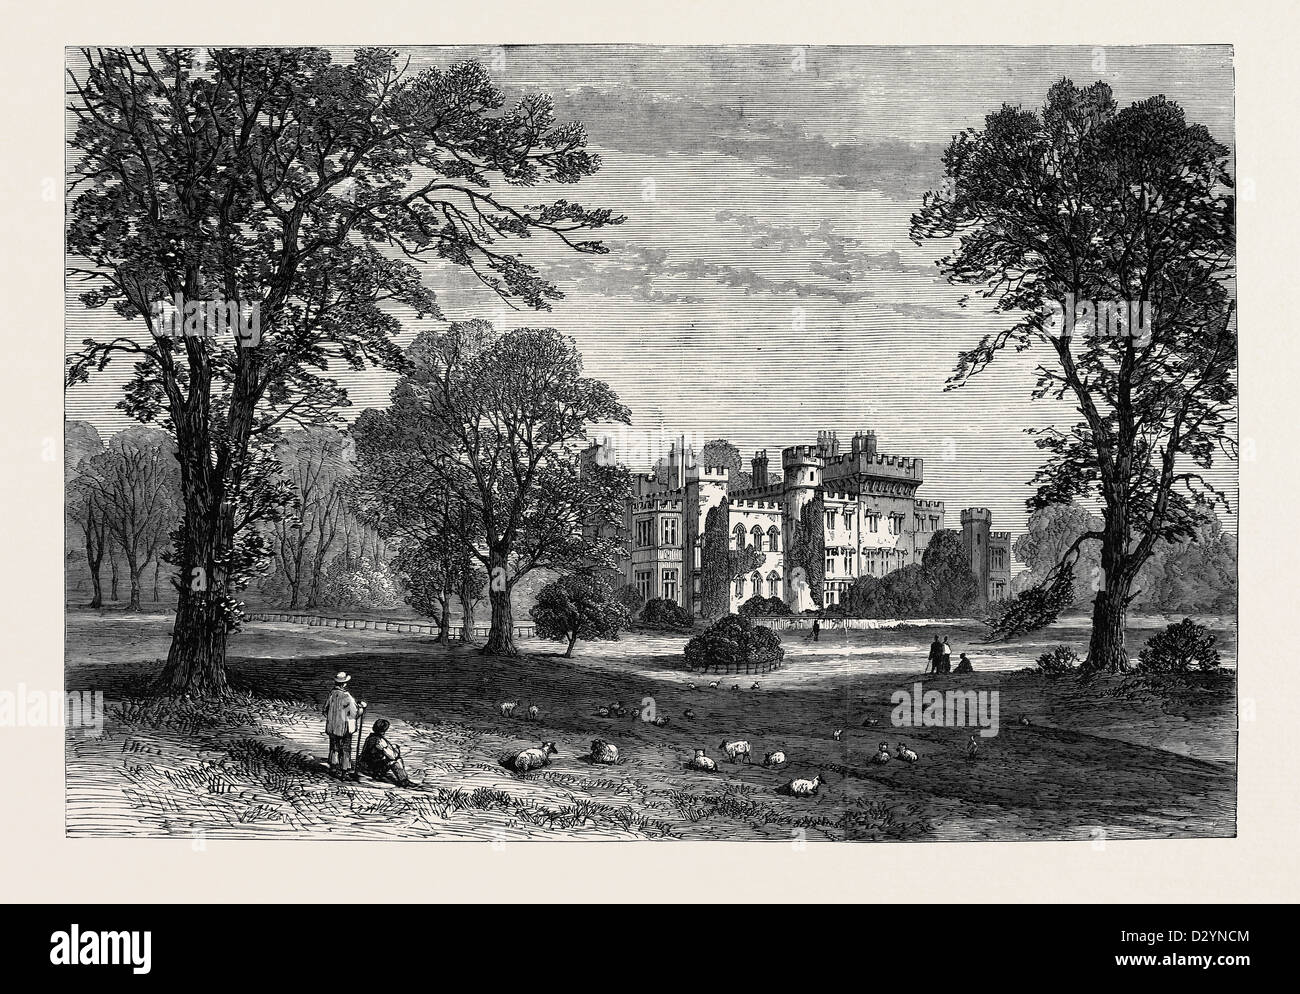 HAWARDEN CASTLE FROM THE PARK 1880 Stock Photo - Alamy